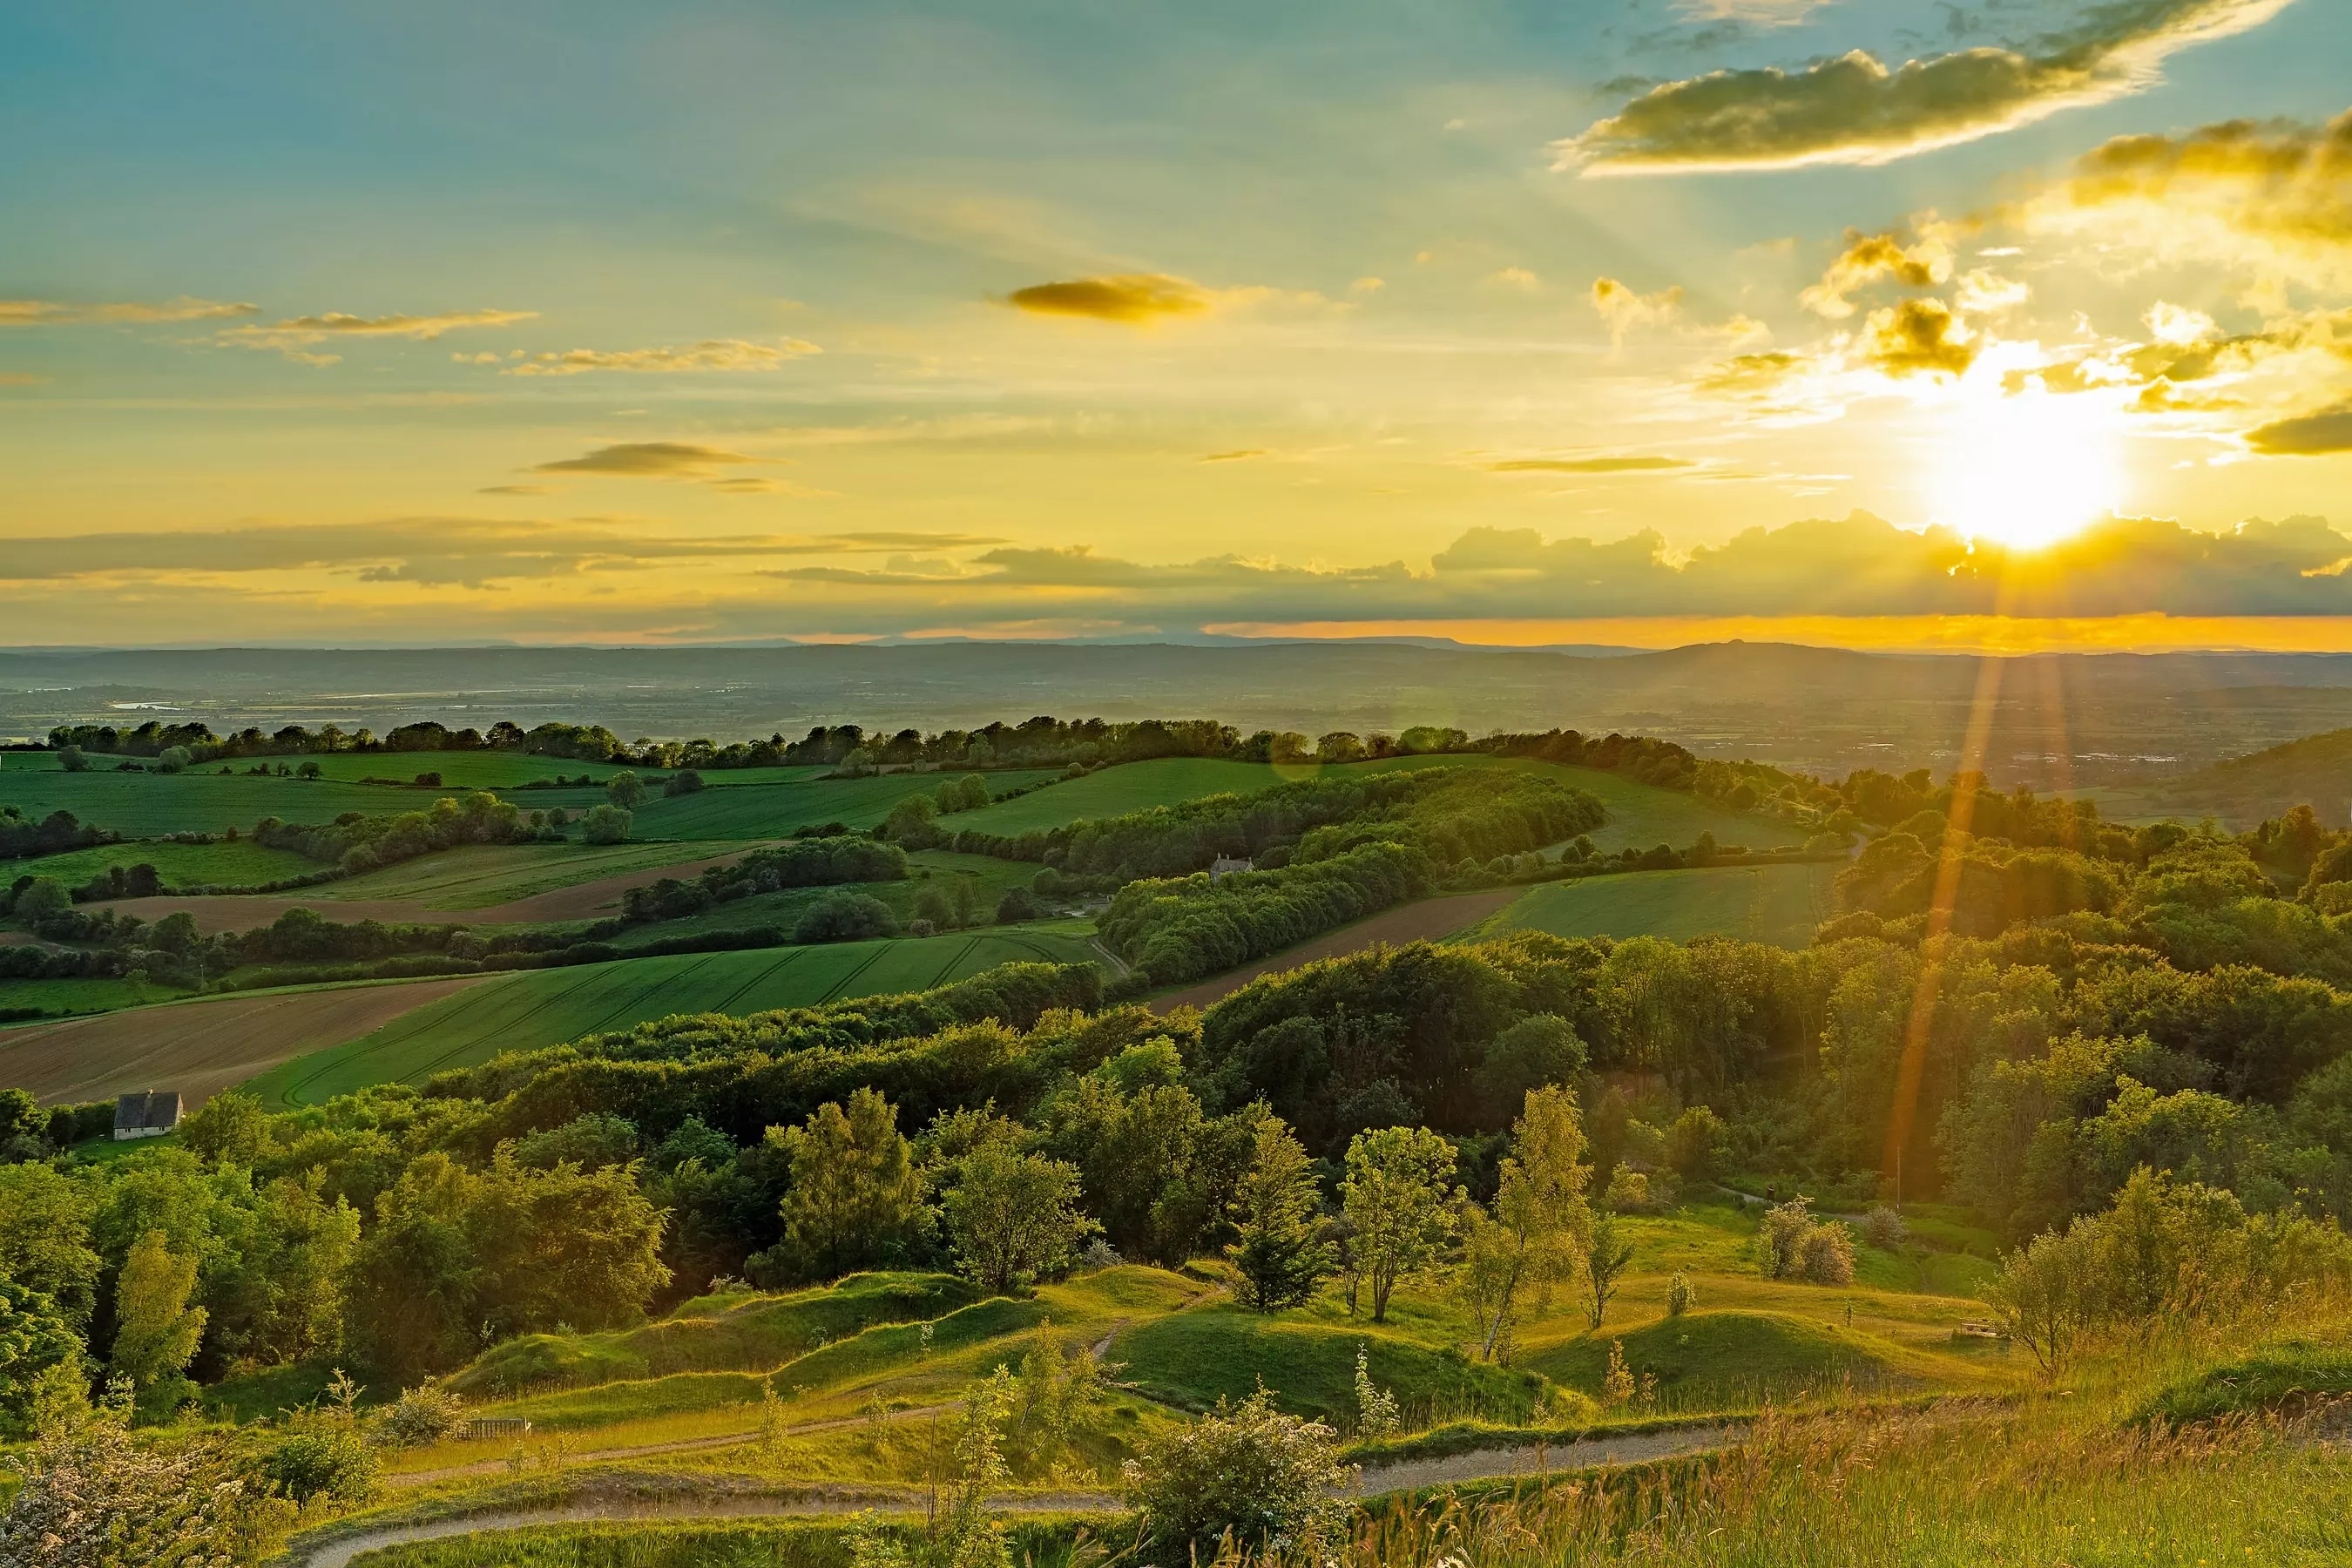 A landscape view of the Cotswold countryside at sunset.